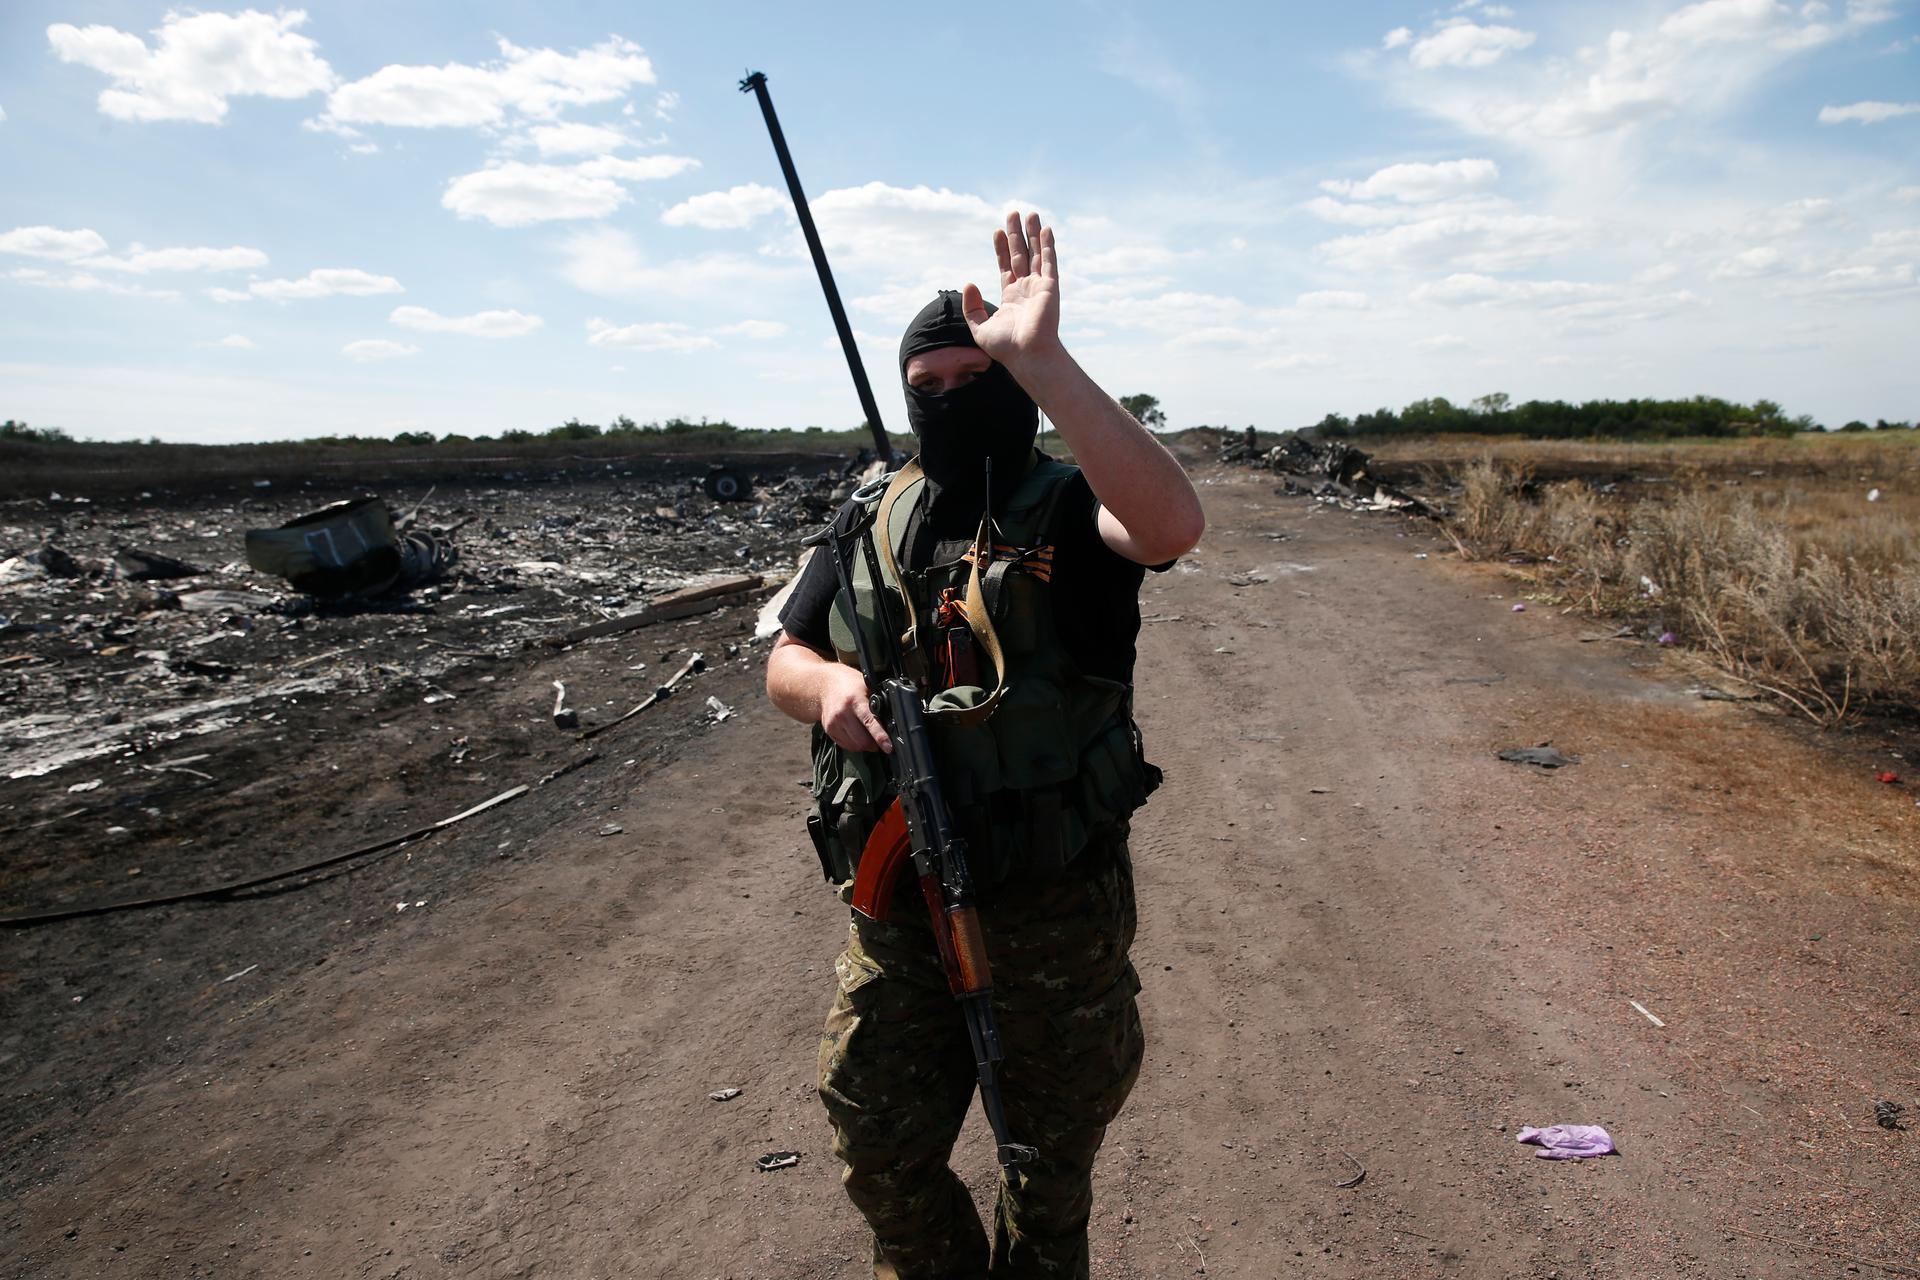 An armed pro-Russian separatist gestures to reporters at the crash site of Malaysia Airlines Flight MH17, near the village of Hrabove (Grabovo), Donetsk region July 21, 2014.